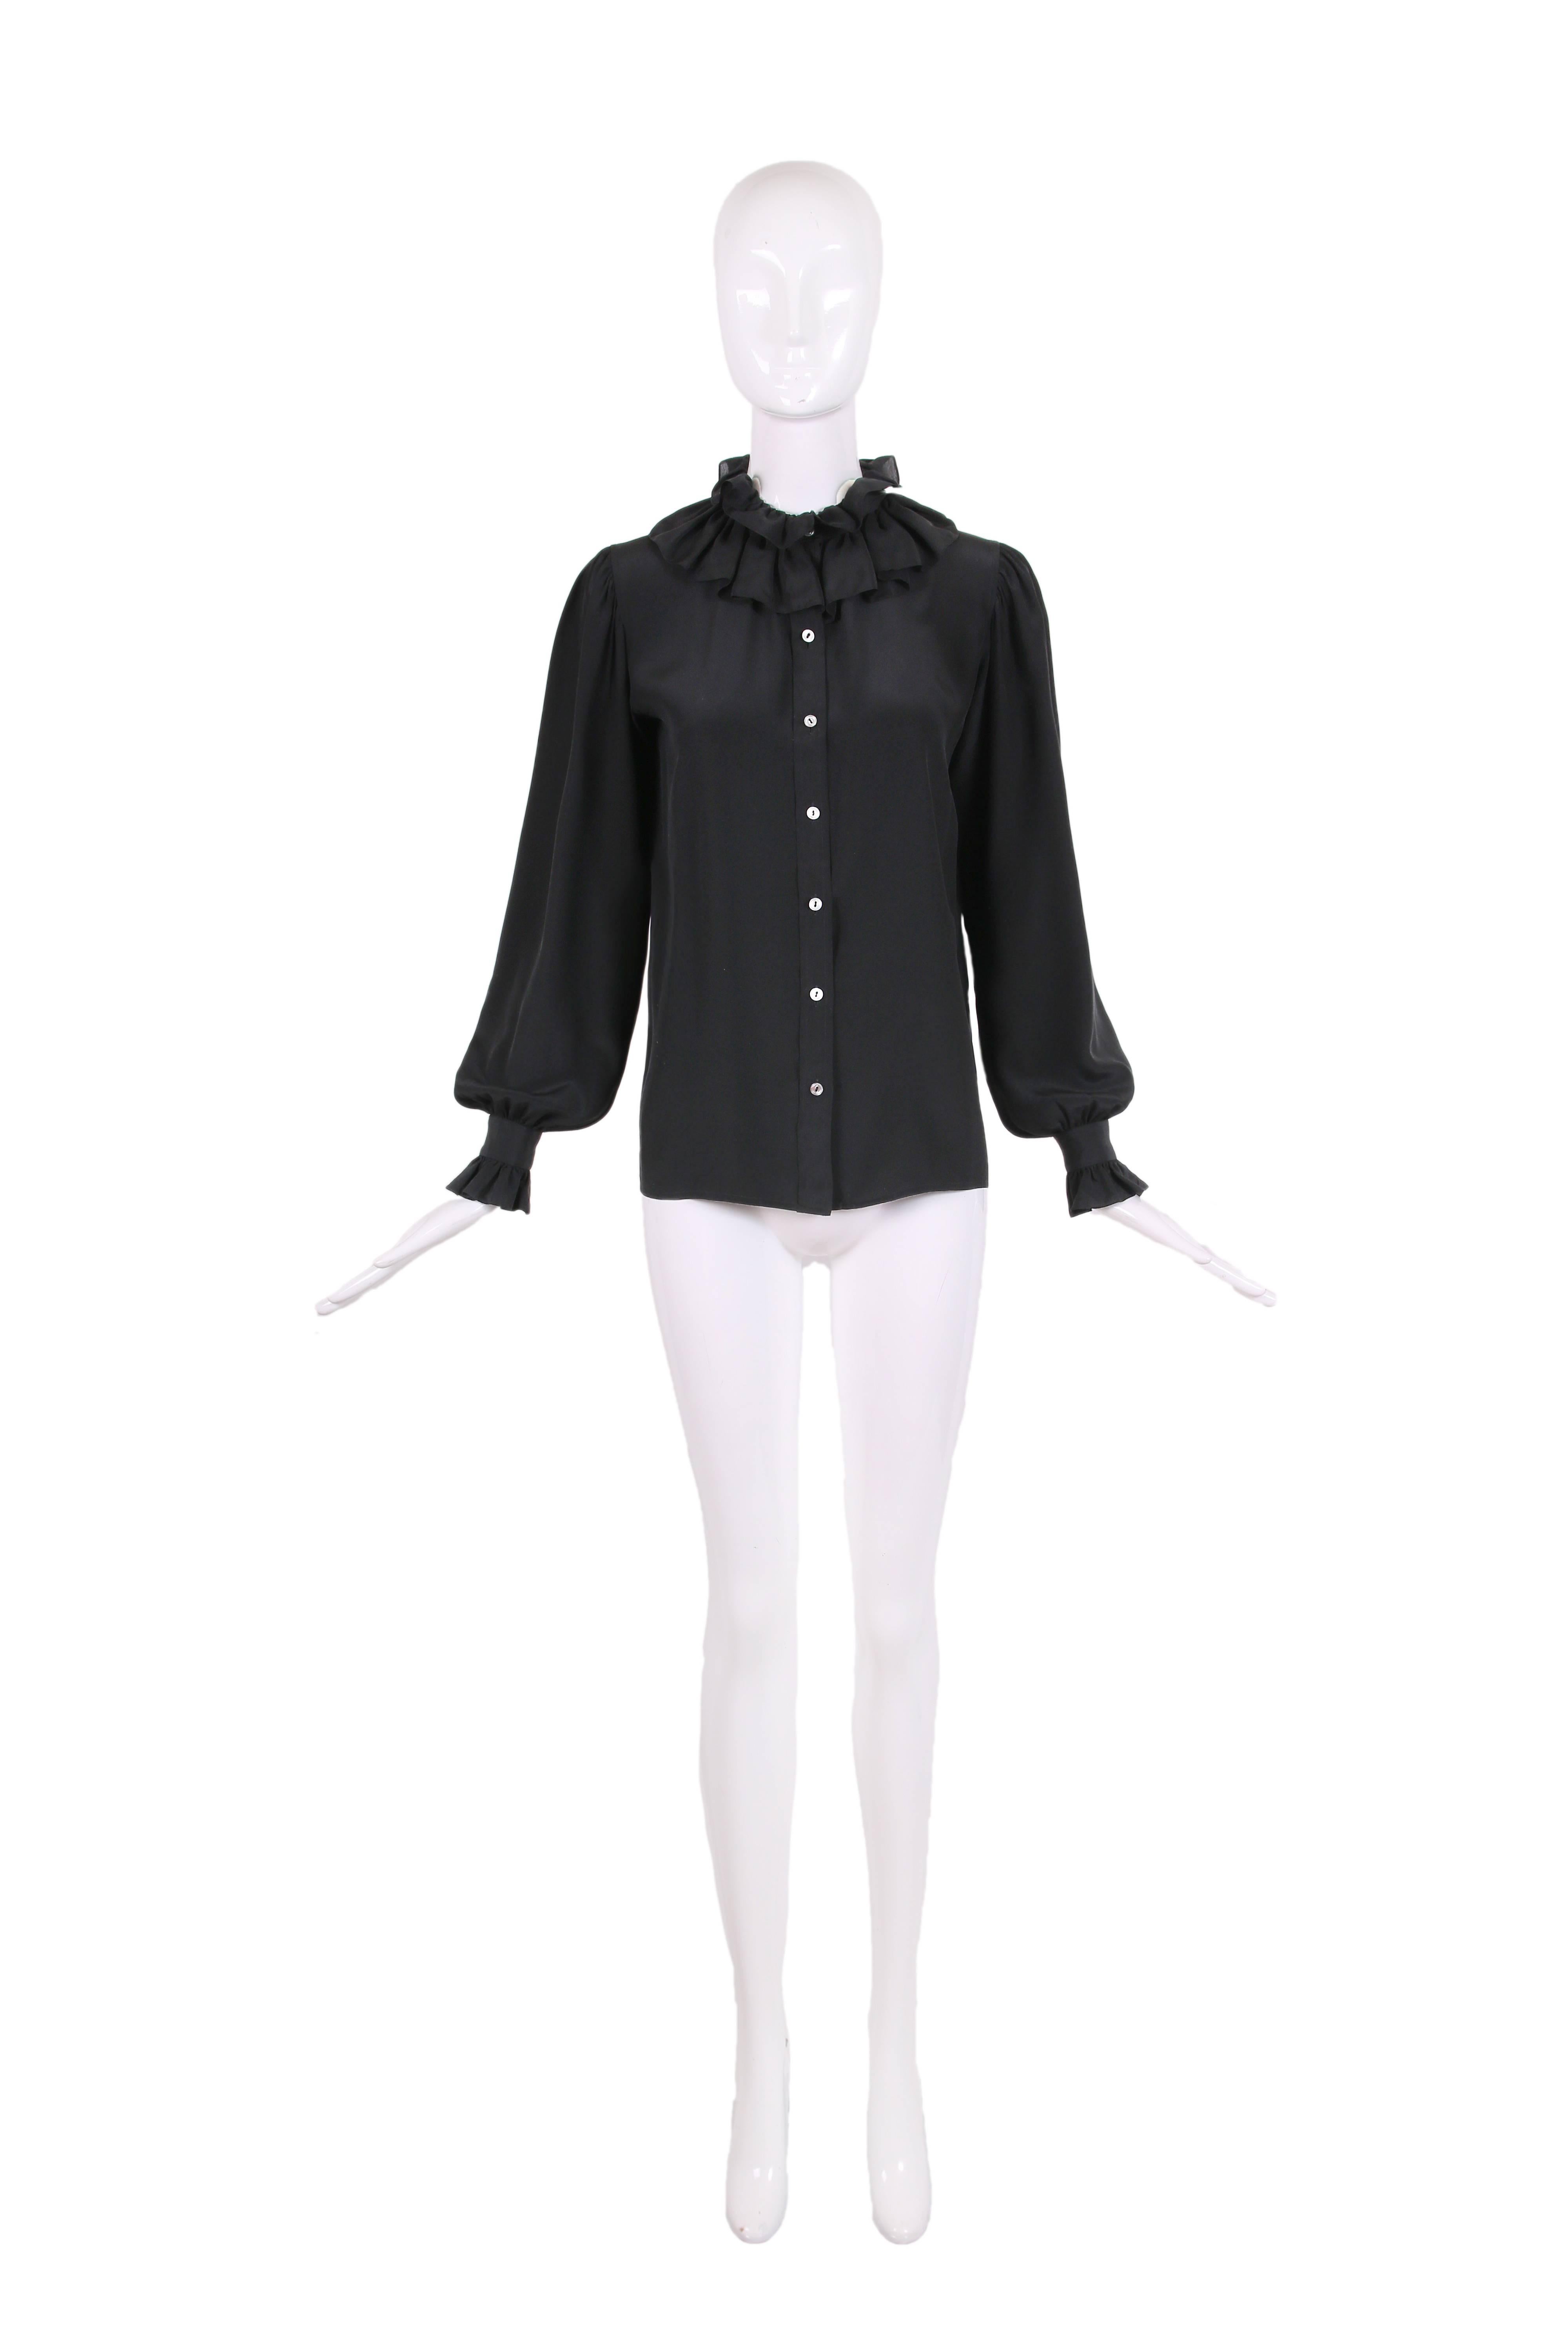 Vintage Yves Saint Laurent black silk blouse with buttons up the front and sleeve cuffs and ruffle trim at the neck and sleeves. In excellent condition.
MEASUREMENTS:
Shoulders - 14